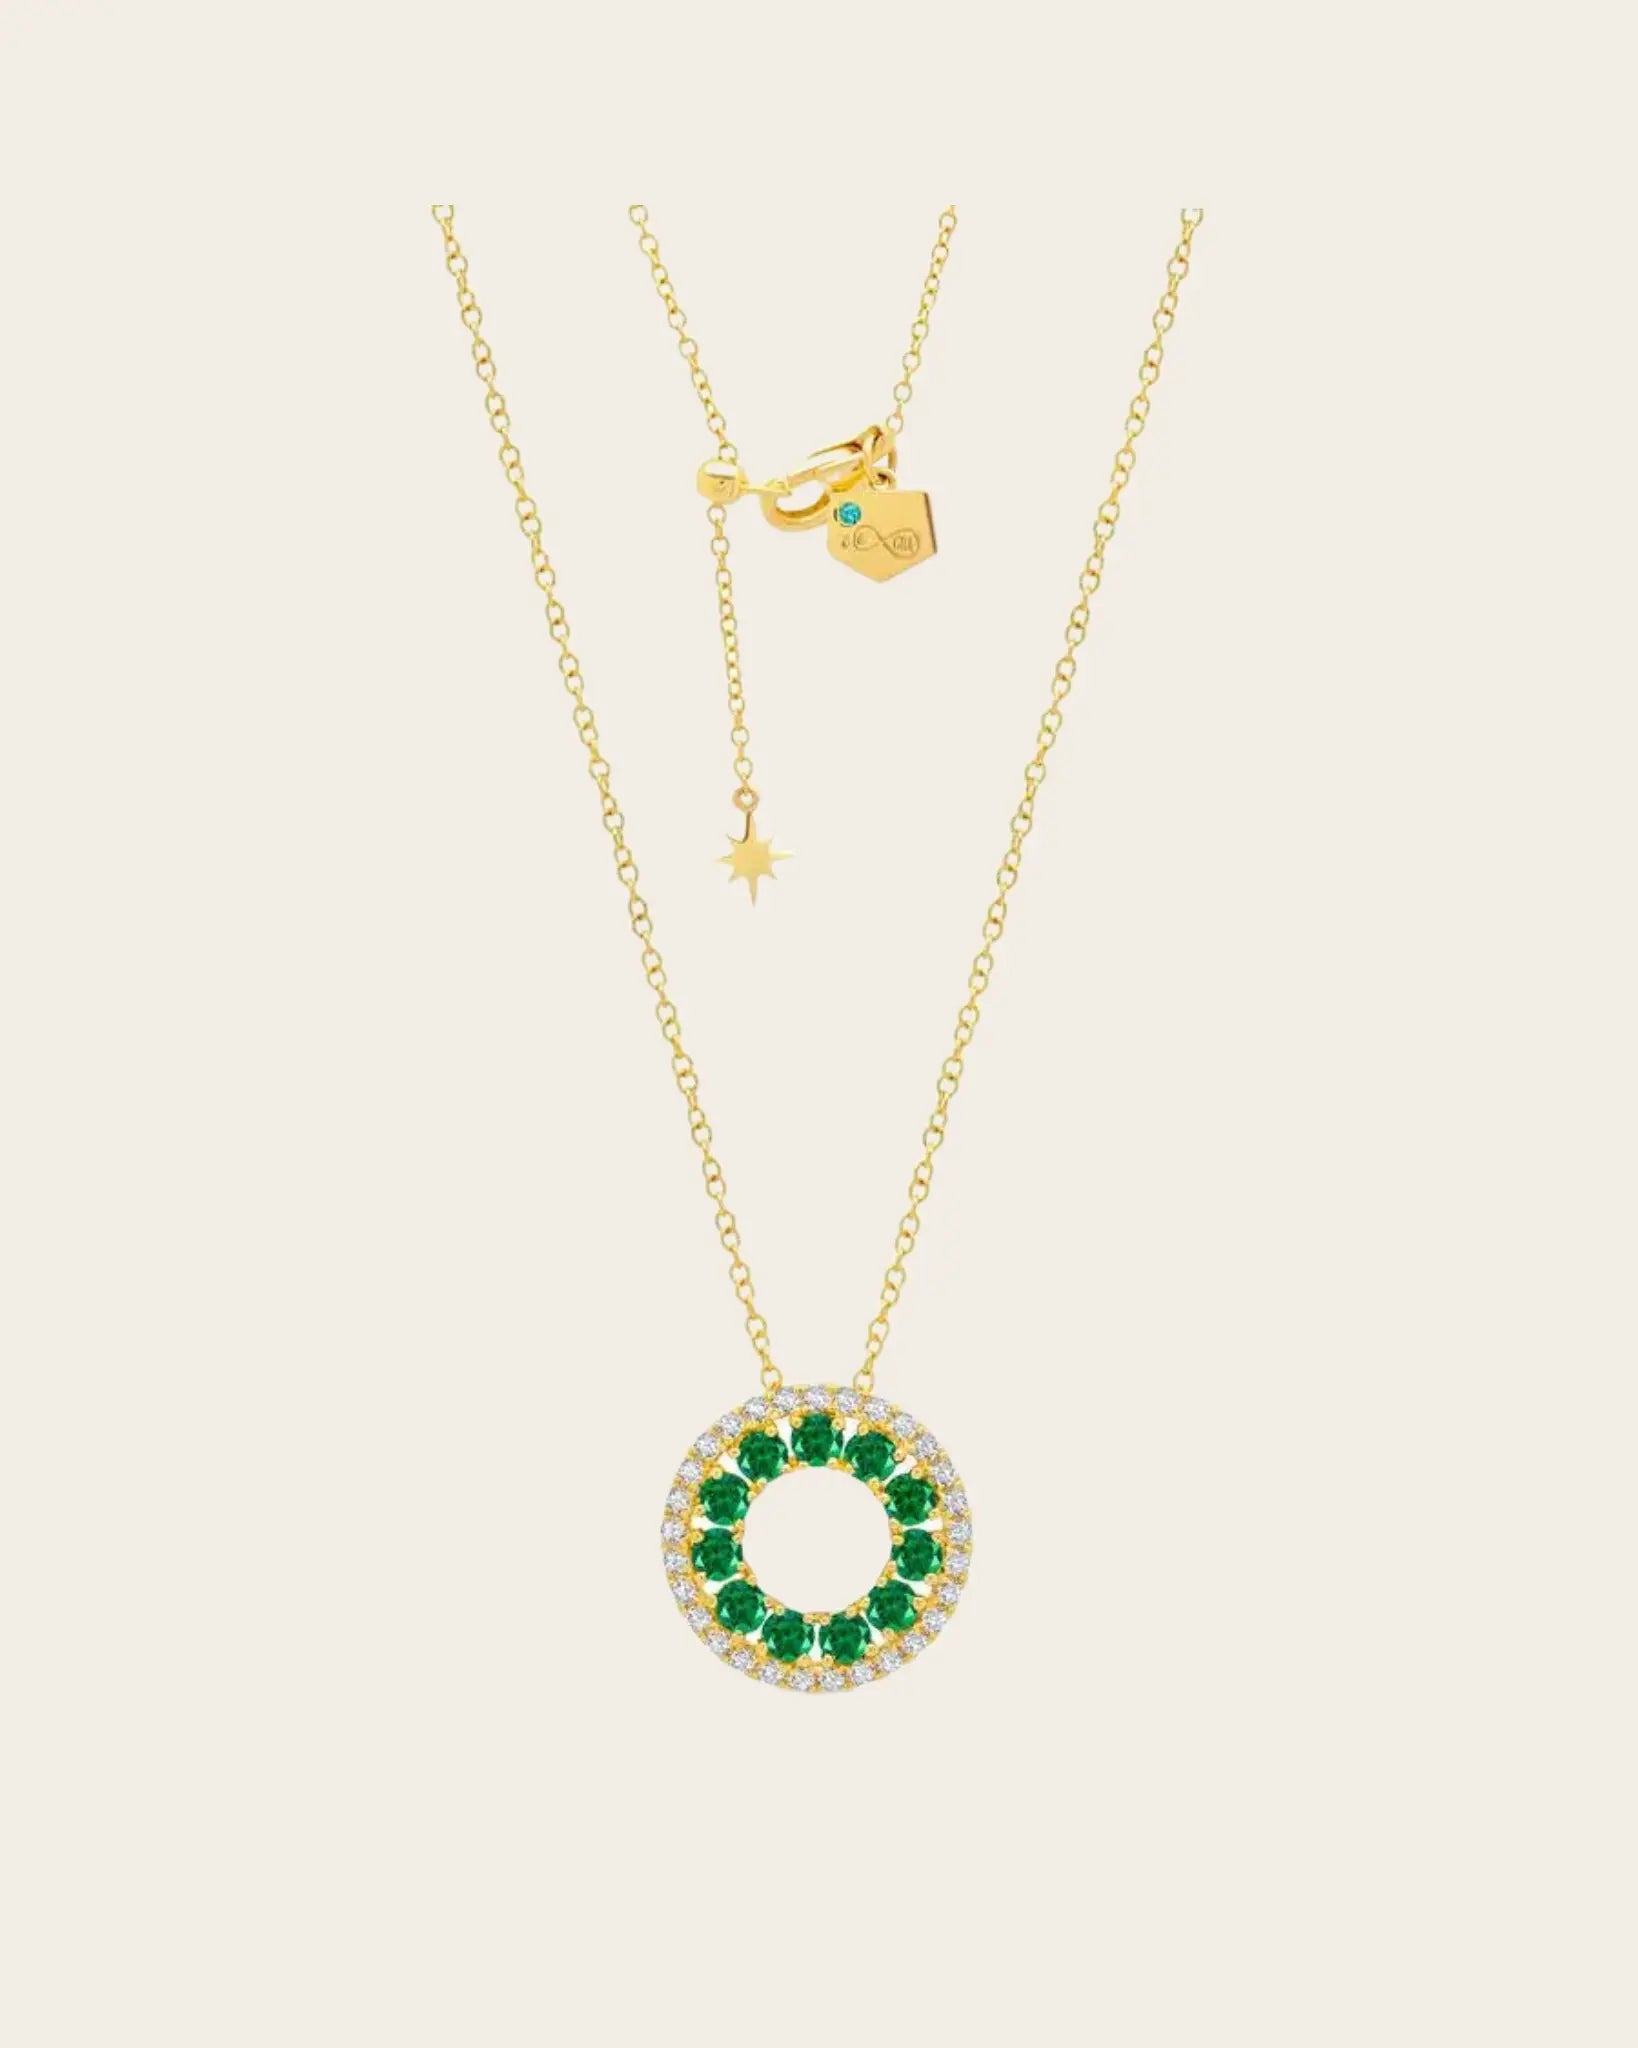 Emerald 3 Sided Circle Necklace Emerald 3 Sided Circle Necklace Graziela Gems Graziela Gems  Squash Blossom Vail